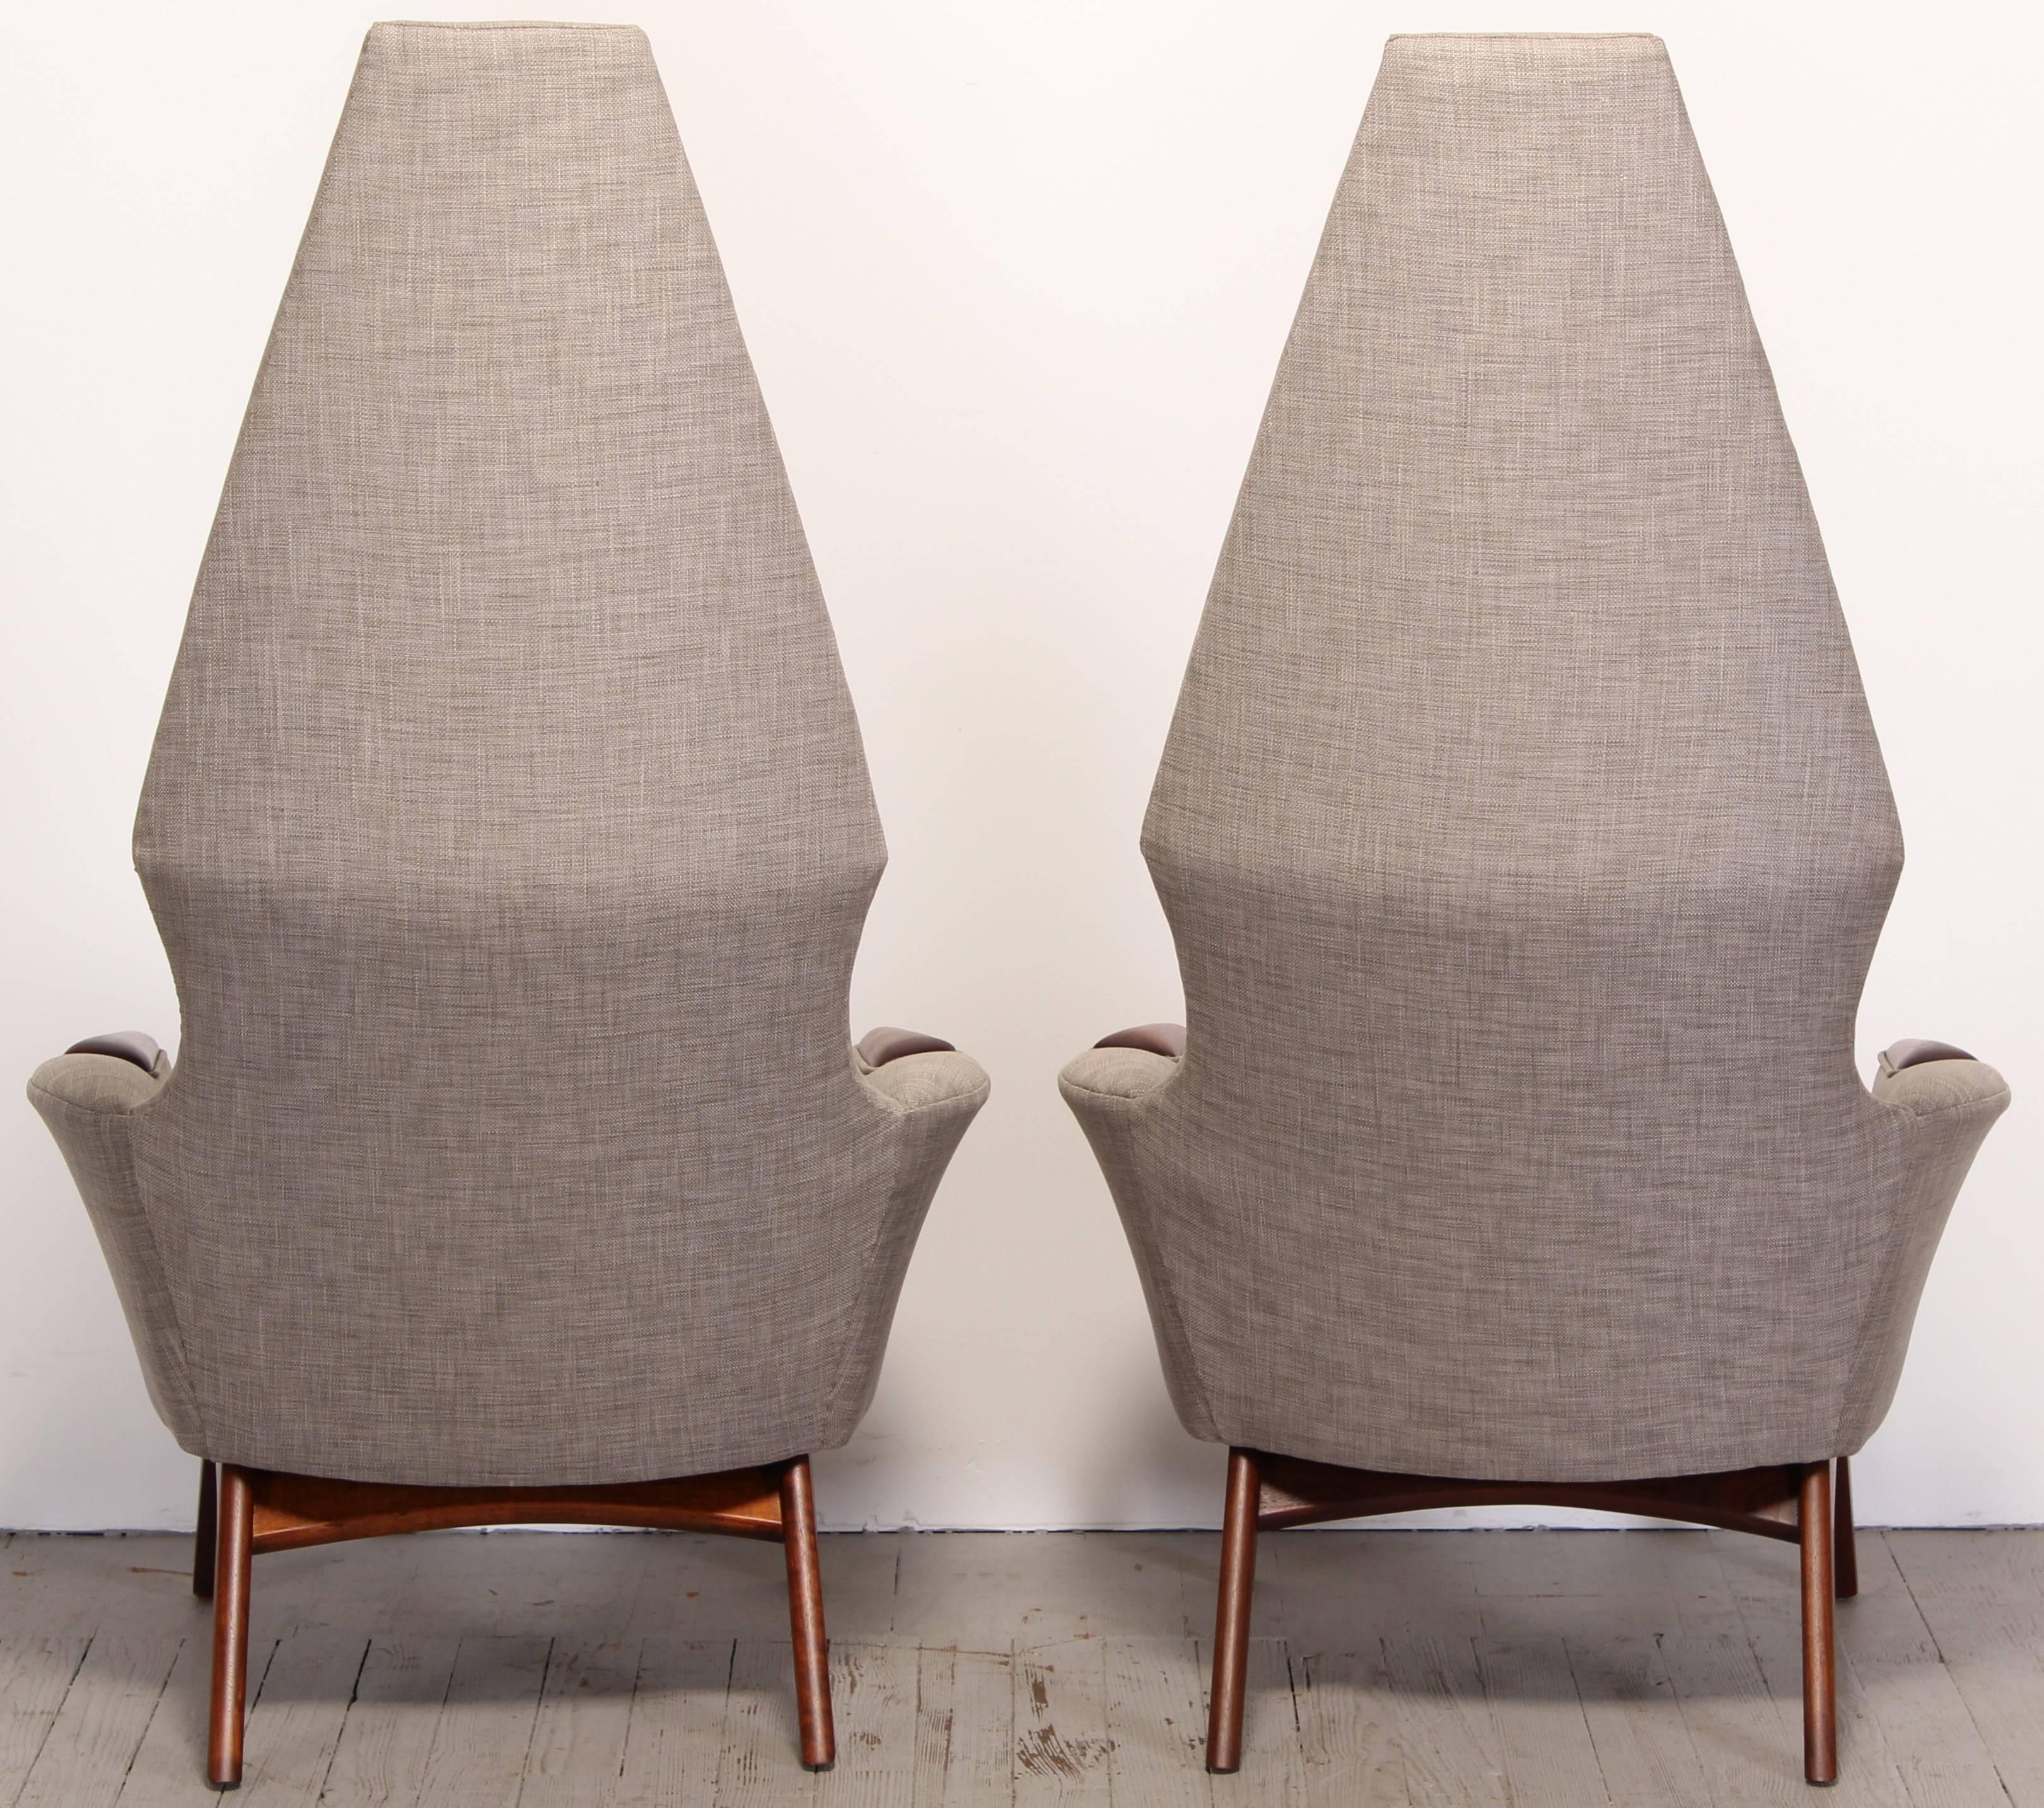 Upholstery Adrian Pearsall Pair of Walnut Chairs for Craft Associates Model #2056-C, 1960